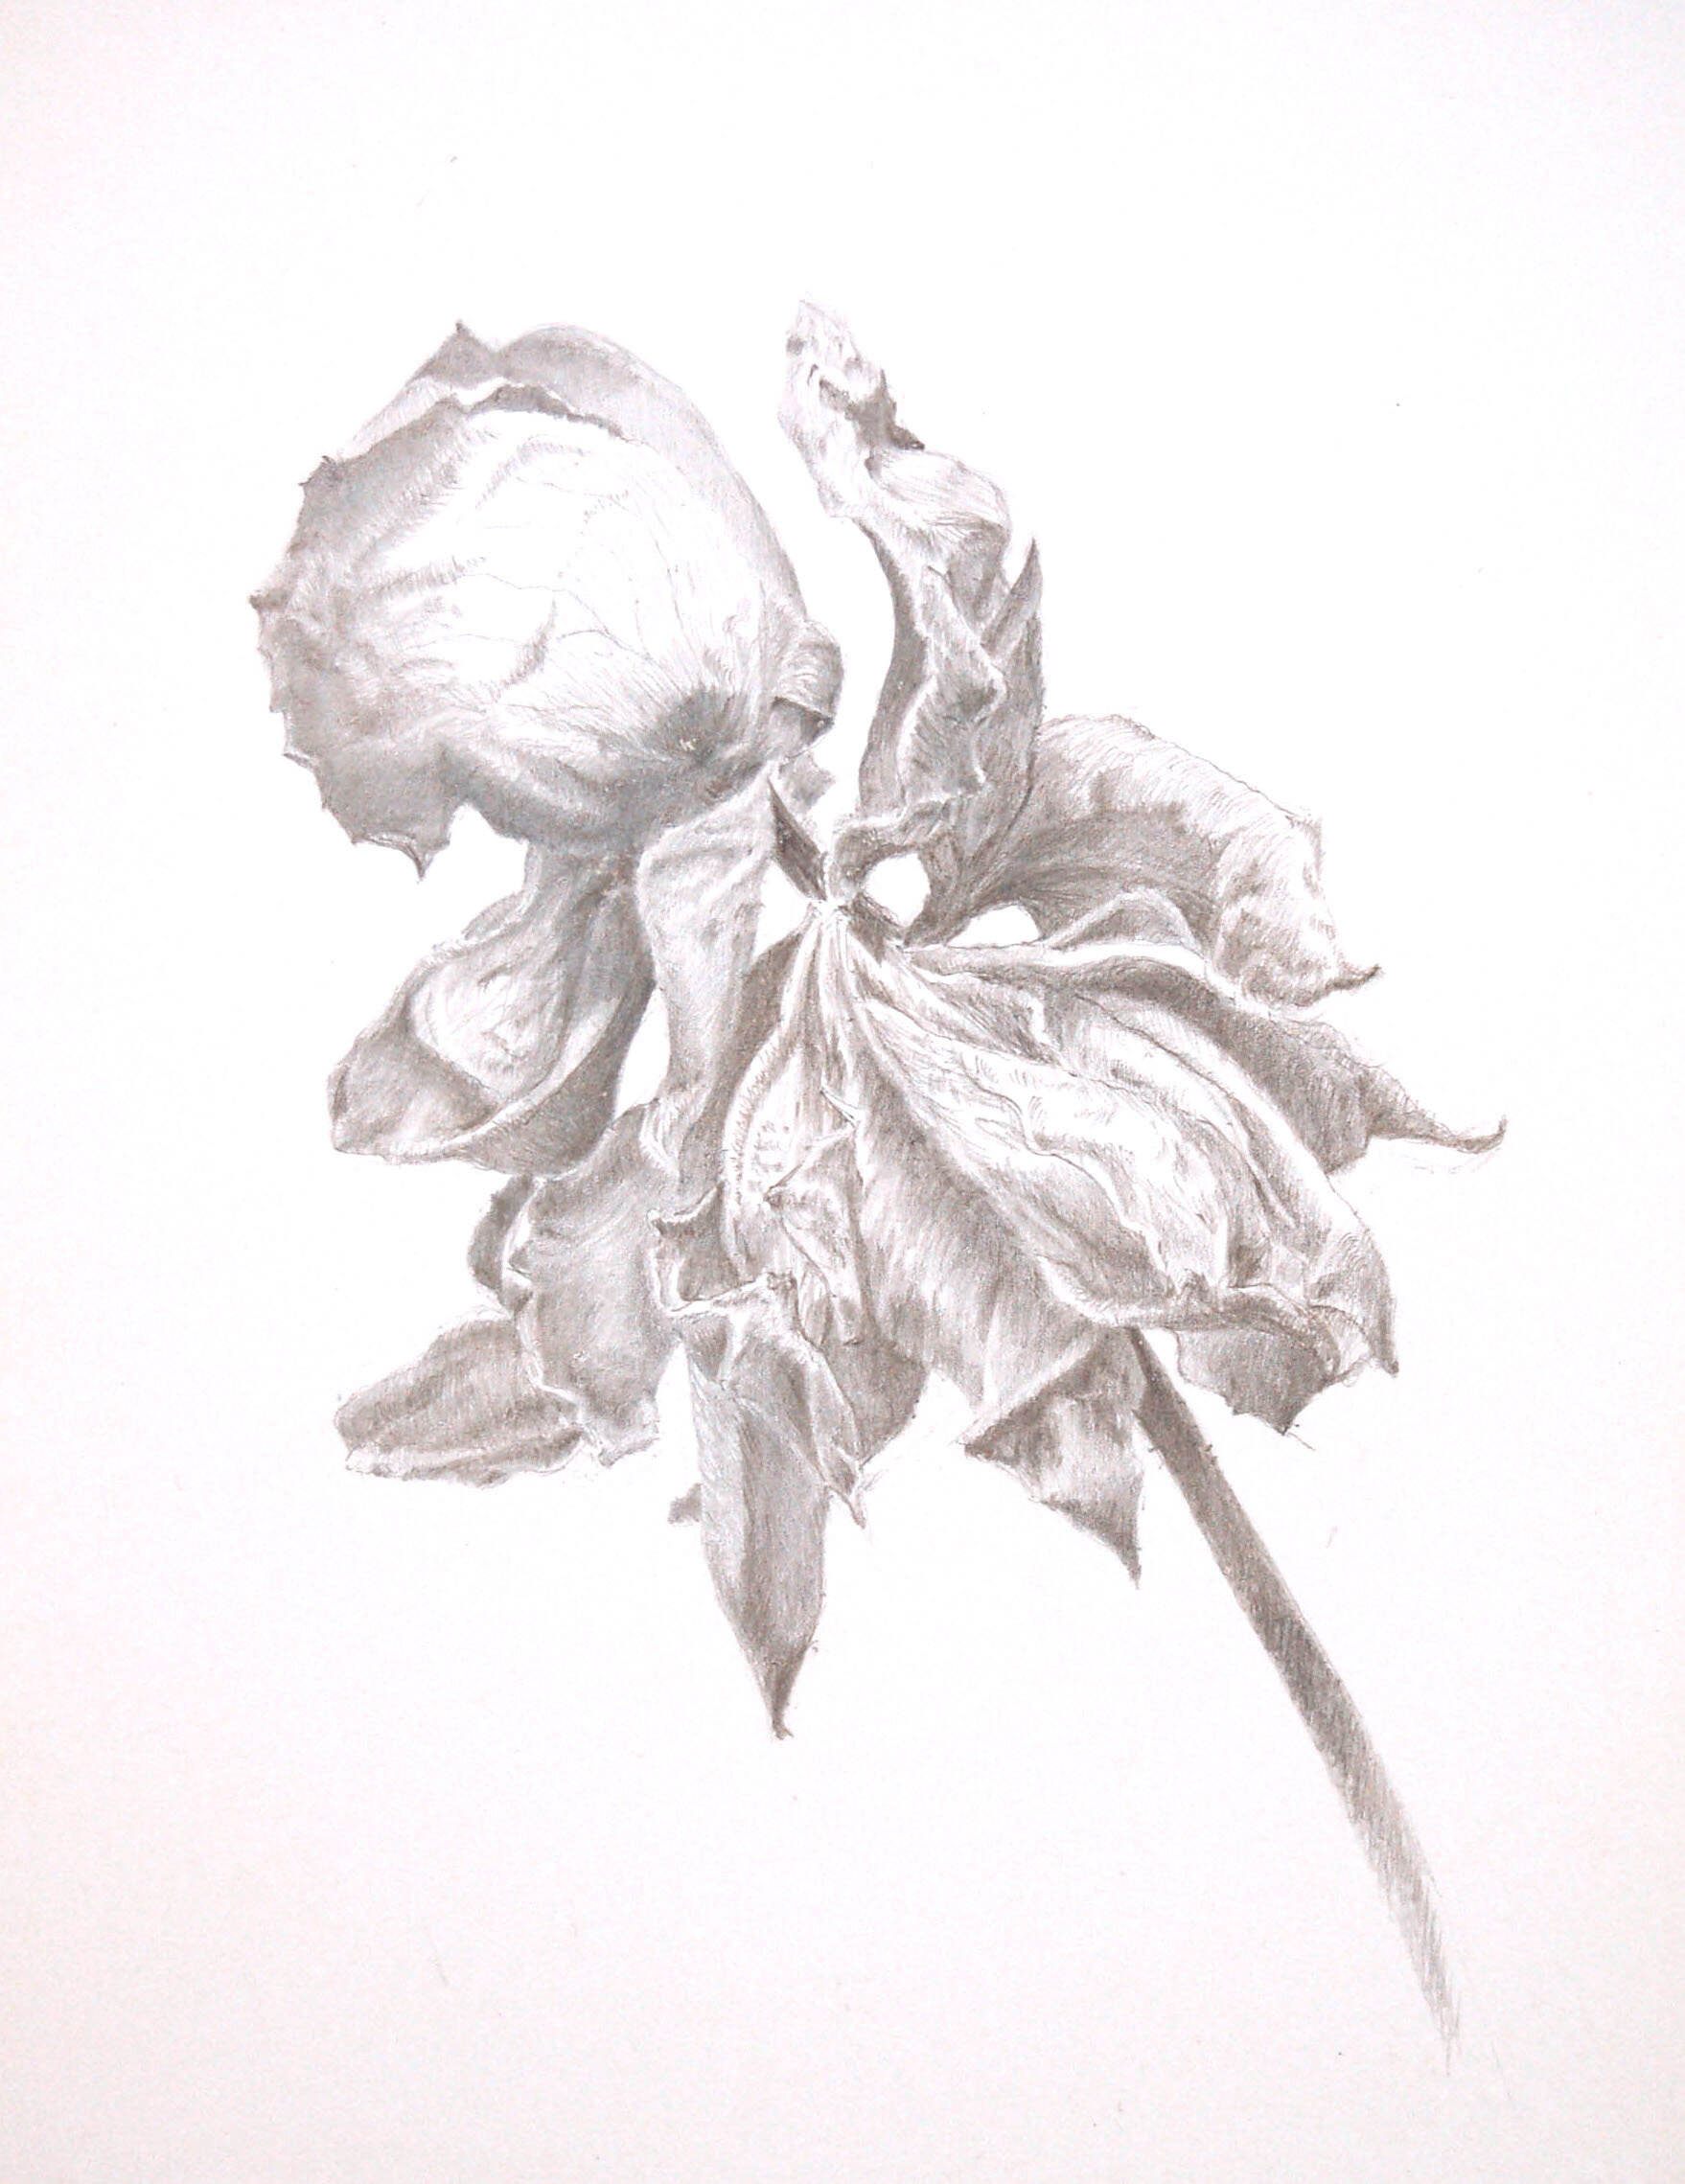    Rose Motion Left  , silverpoint on paper, 5 5/8” x 3 15/16” 